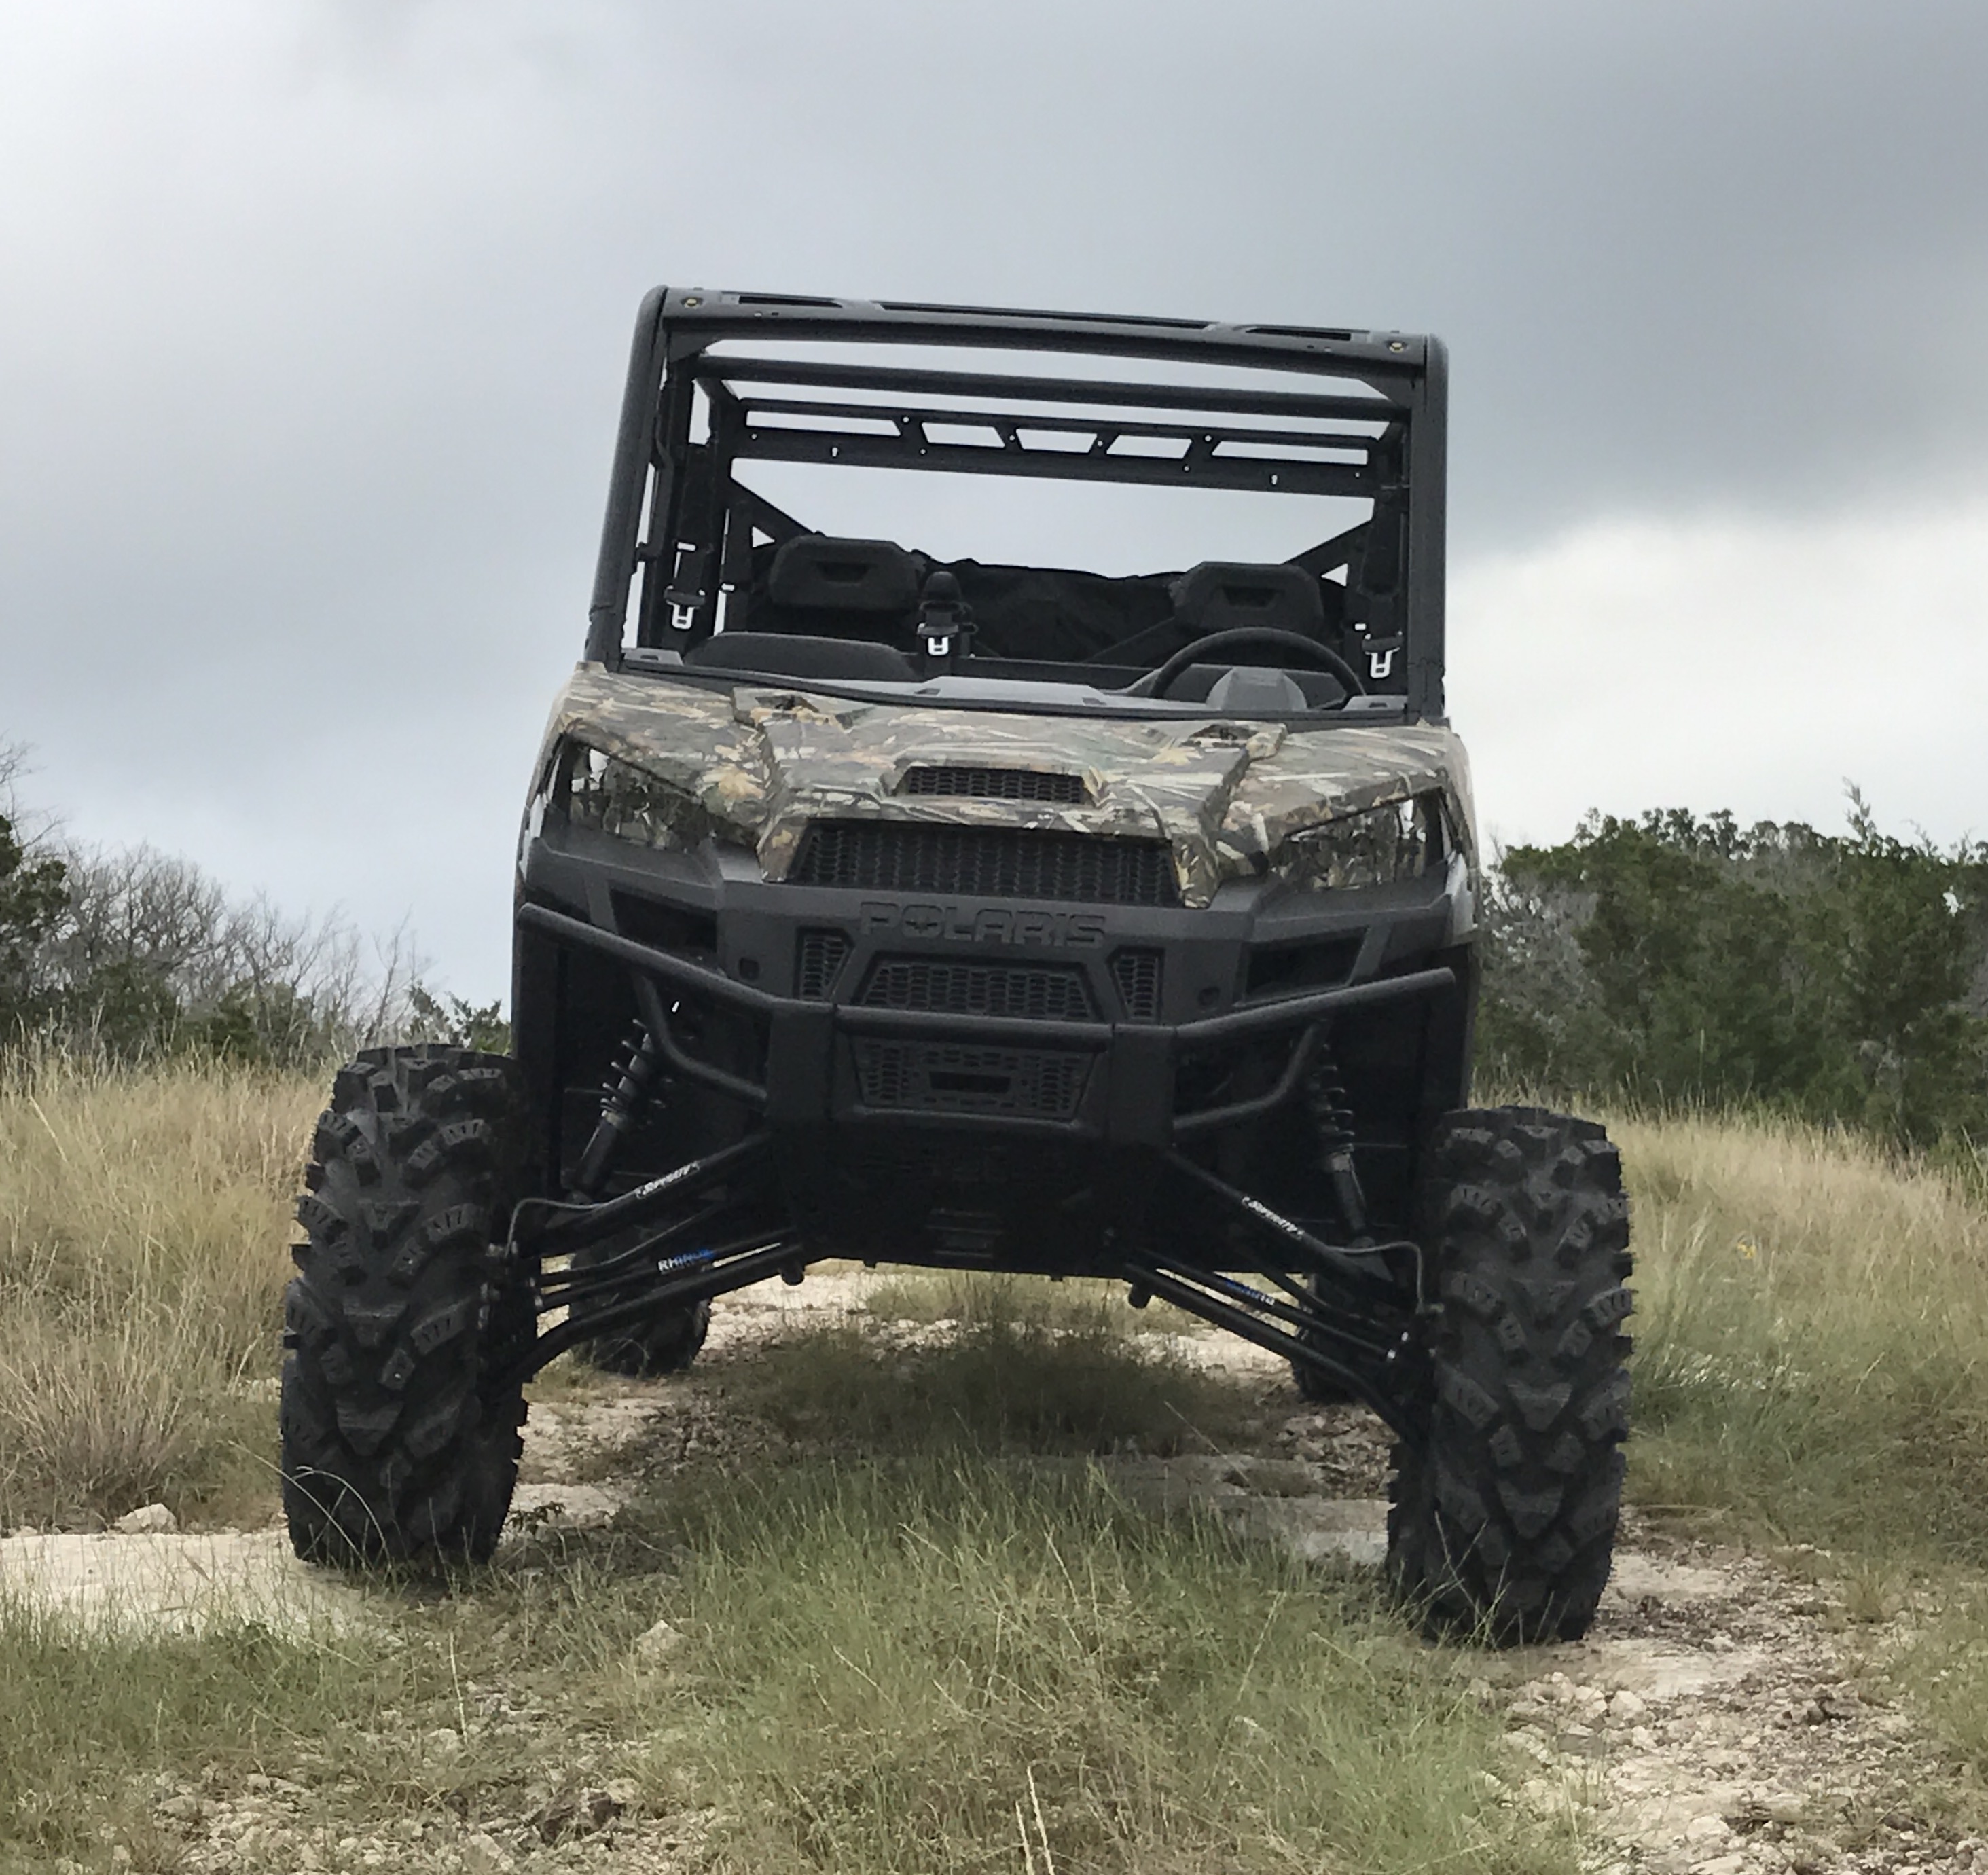 What is your Polaris Ranger Width?